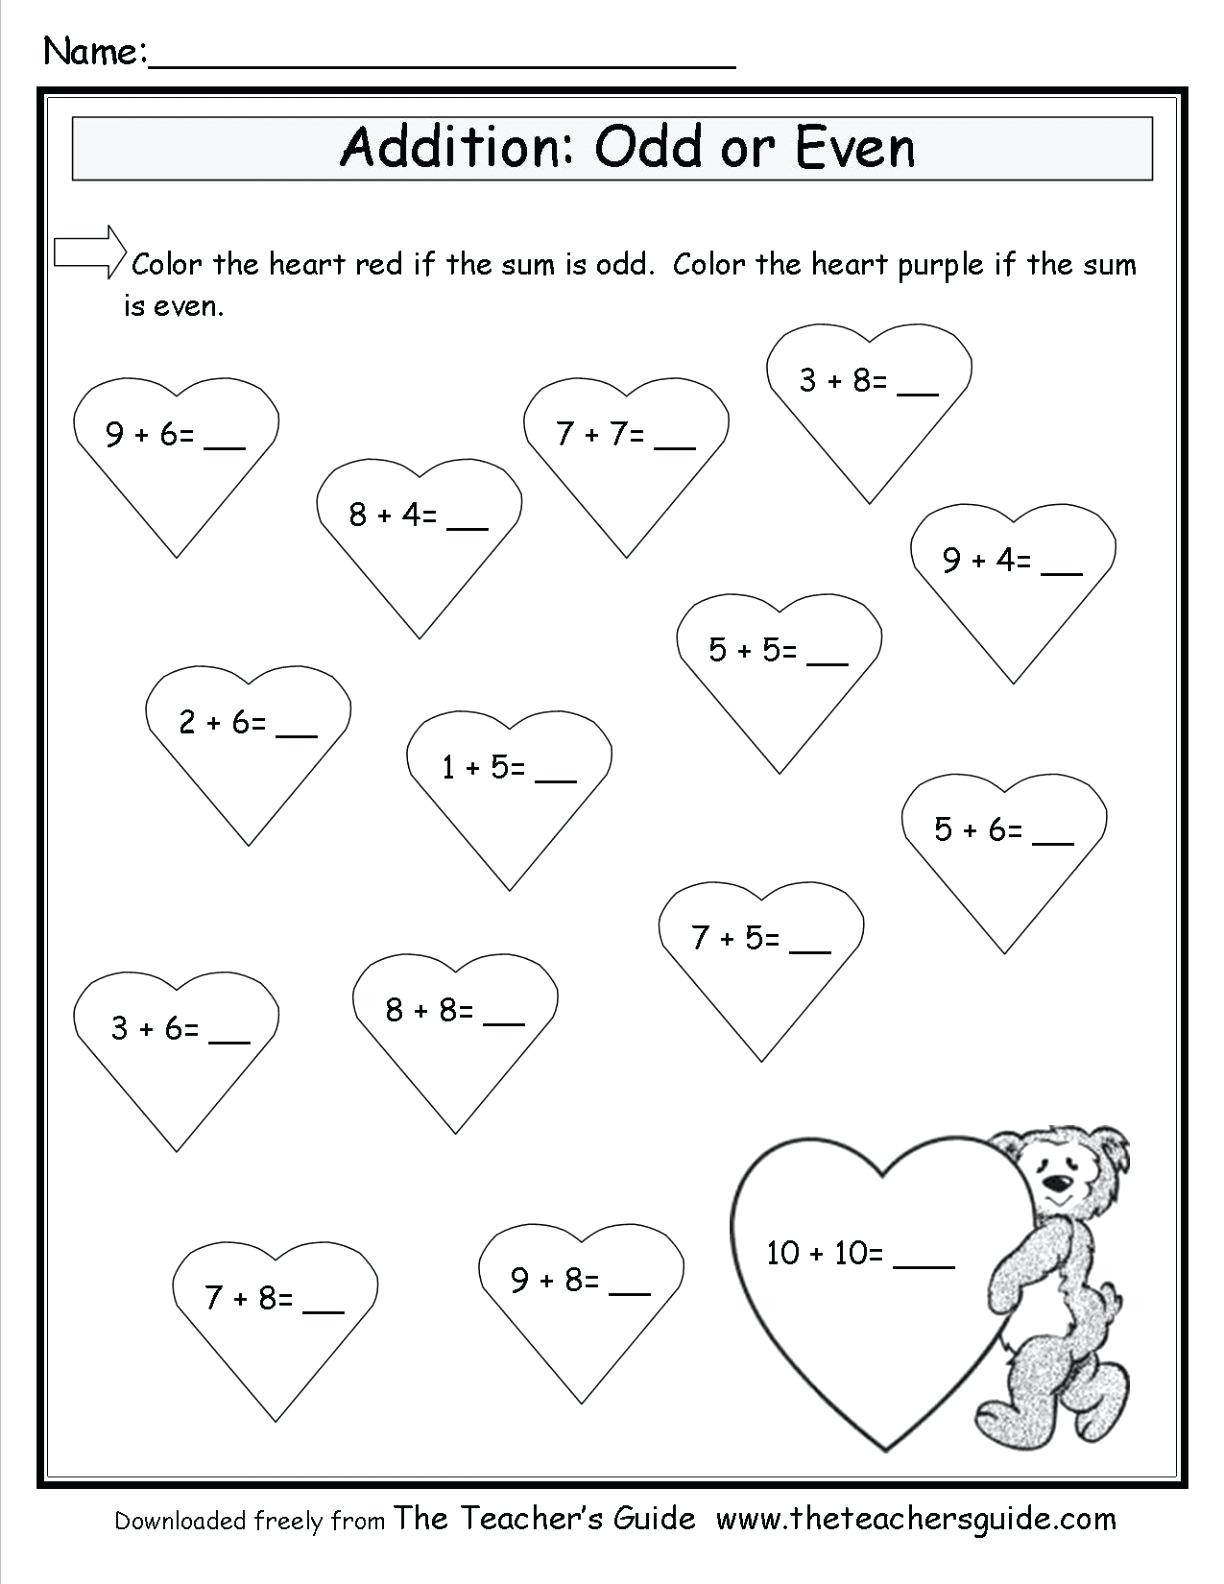 Free Math Worksheets Second Grade 2 Addition Adding whole Tens 2 Digits Missing Number